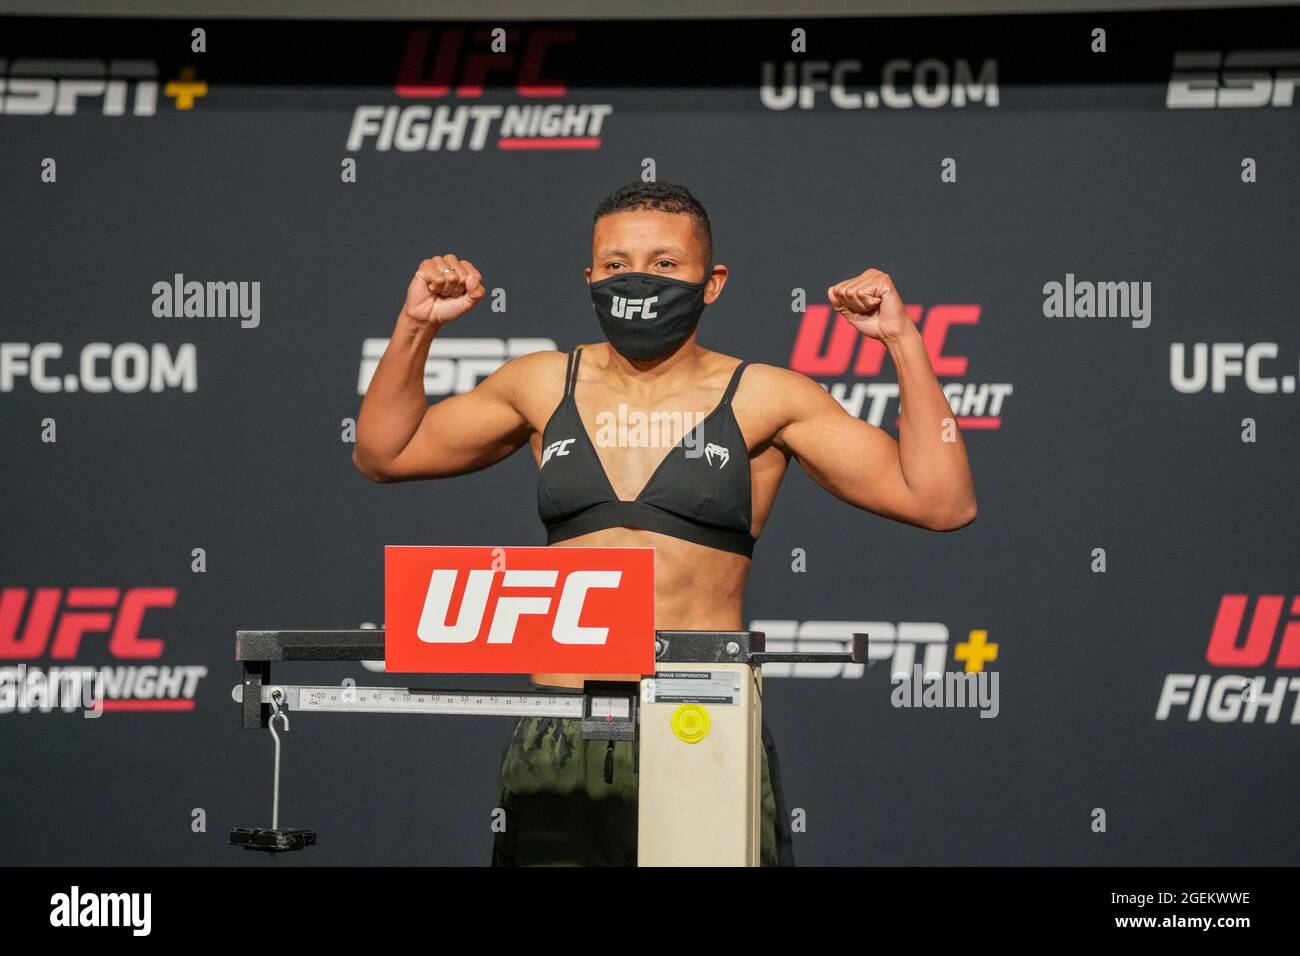 Las Vegas, USA. 20th Aug, 2021. LAS VEGAS, NV - AUGUST 20: Josiane Nunes steps on the scale for the official weigh-ins at UFC Apex for UFC Fight Night - Vegas 34 - Weigh-ins on August 20, 2021 in Las Vegas, NV, United States. (Photo by Louis Grasse/PxImages) Credit: Px Images/Alamy Live News Stock Photo